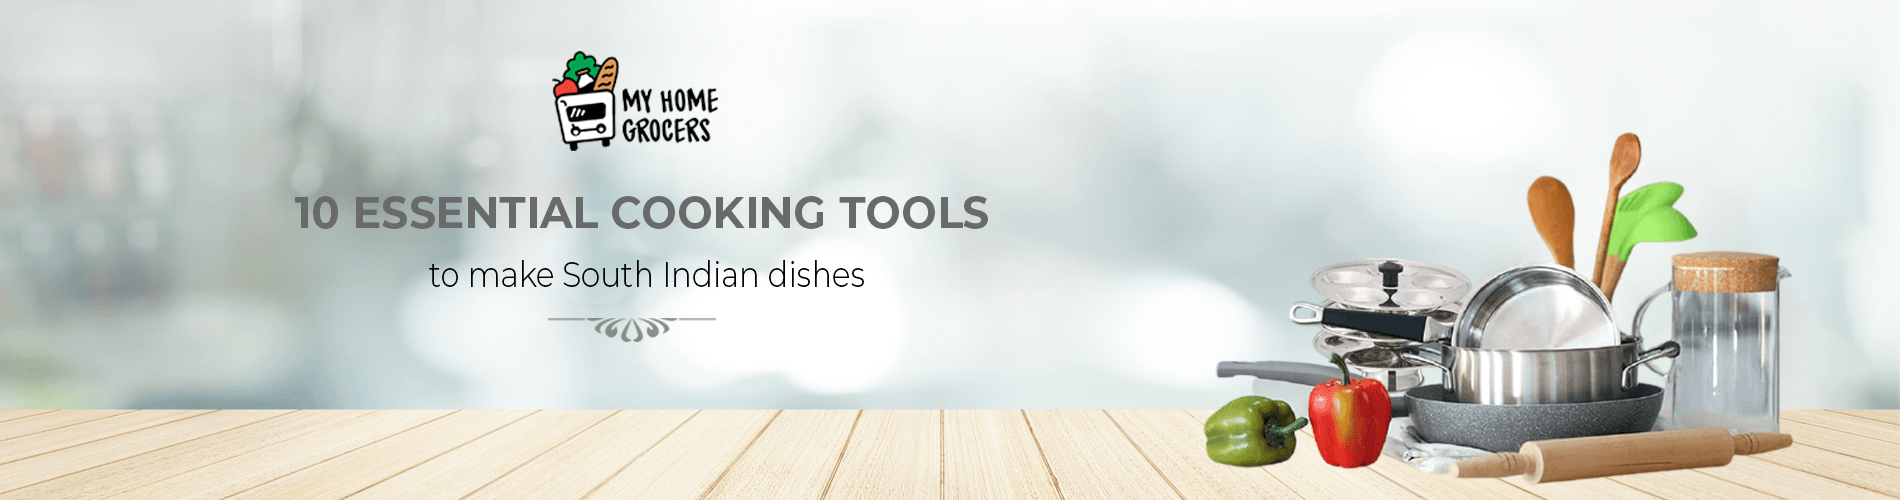 10 essential cooking tools to make South Indian dishes 